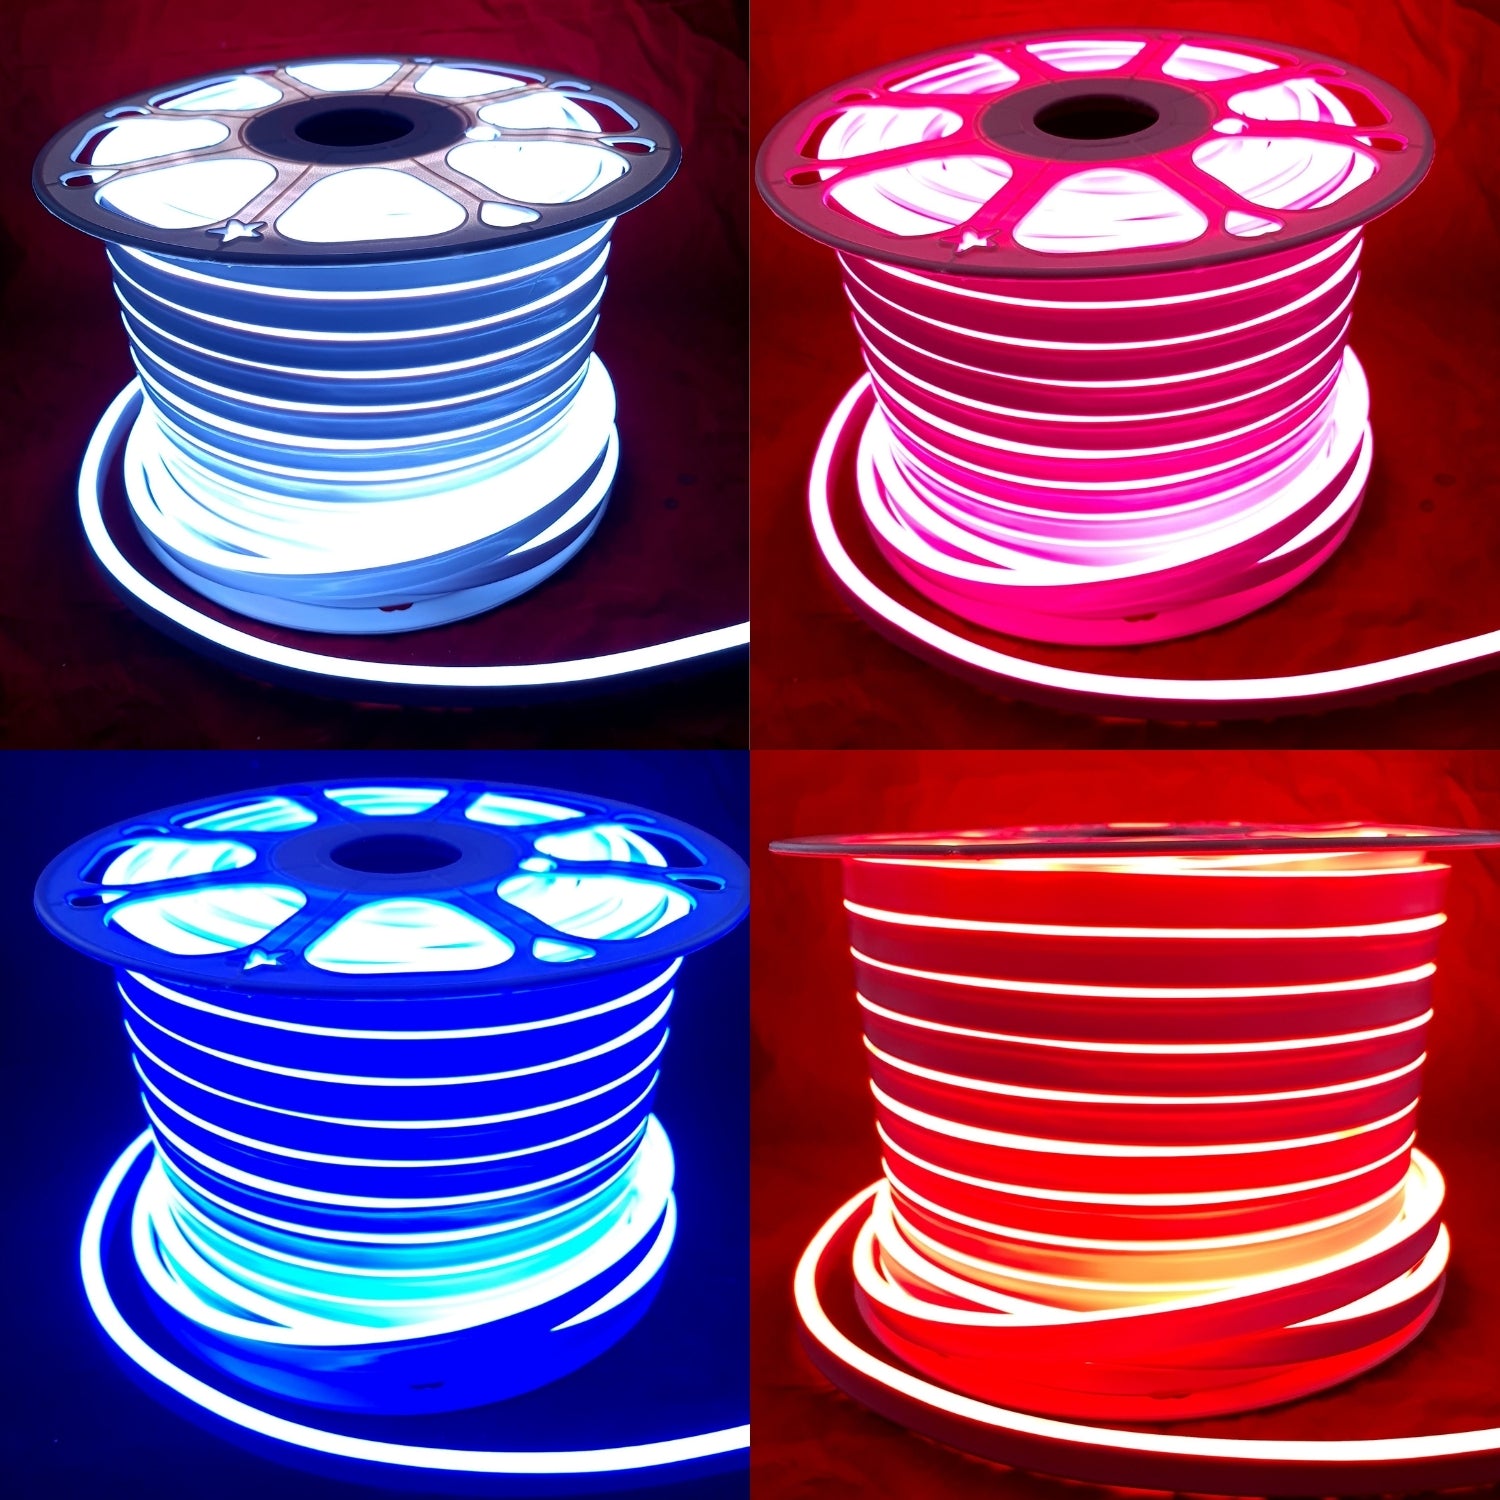 RGB LED Neon Flex 220V 240V 10x20mm Flat Shape IP67 Waterproof Dimmable Bluetooth App Control with Remote - ATOM LED